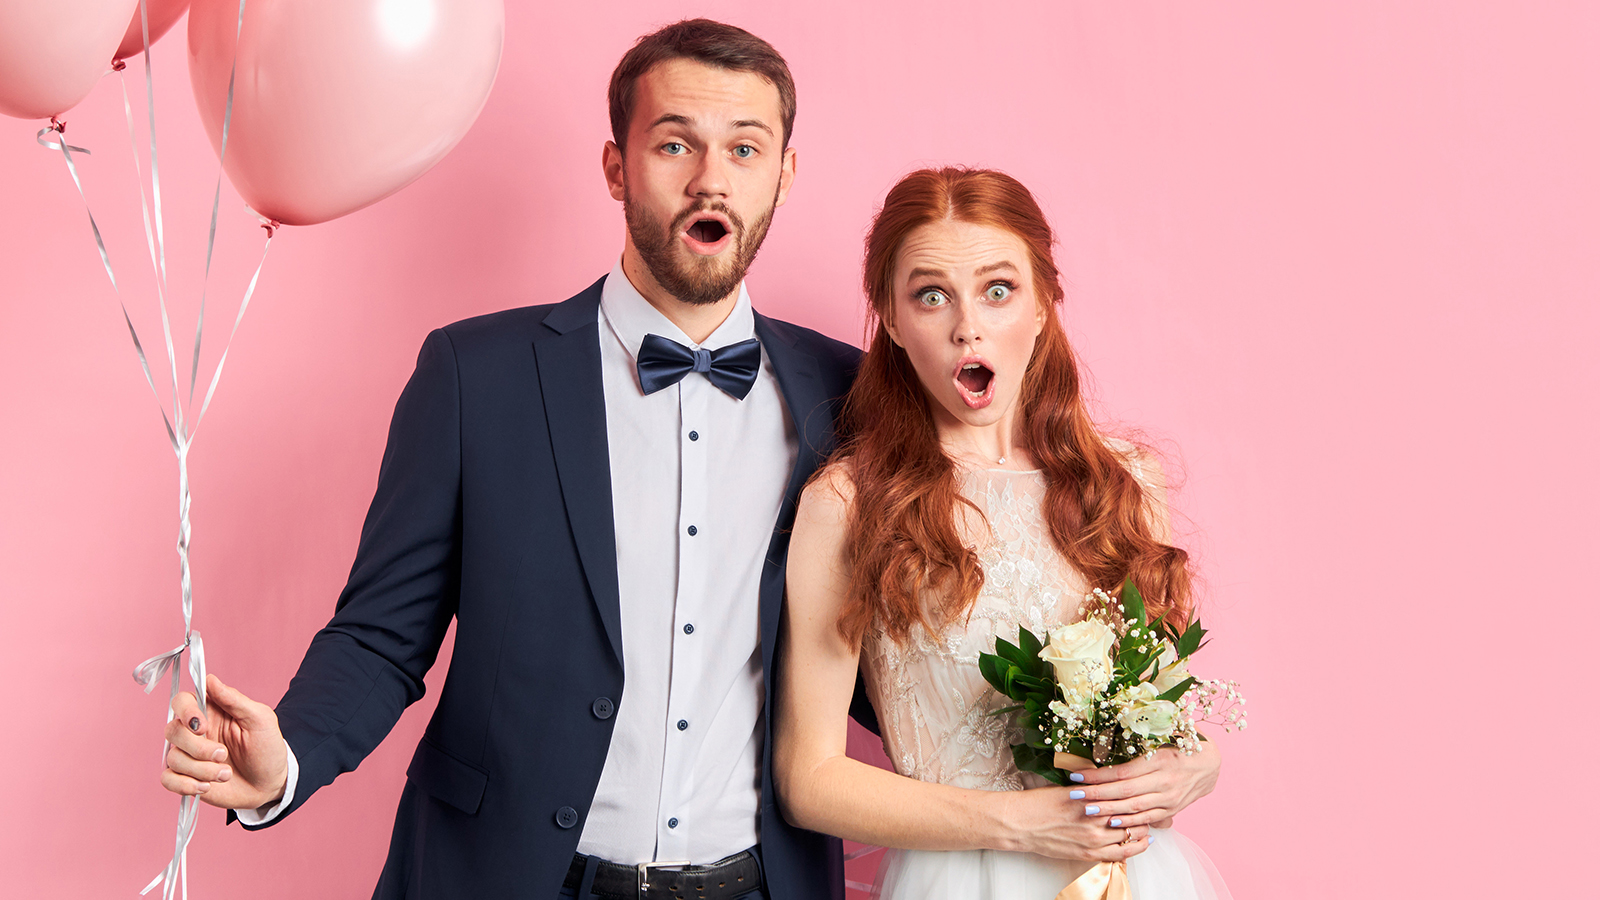 wedding couple posing together isolated over pink background. man in tuxedo holding pink air ballons, woman in white wedding dress bouquet. Woman with auburn hair, couple with opened mouth